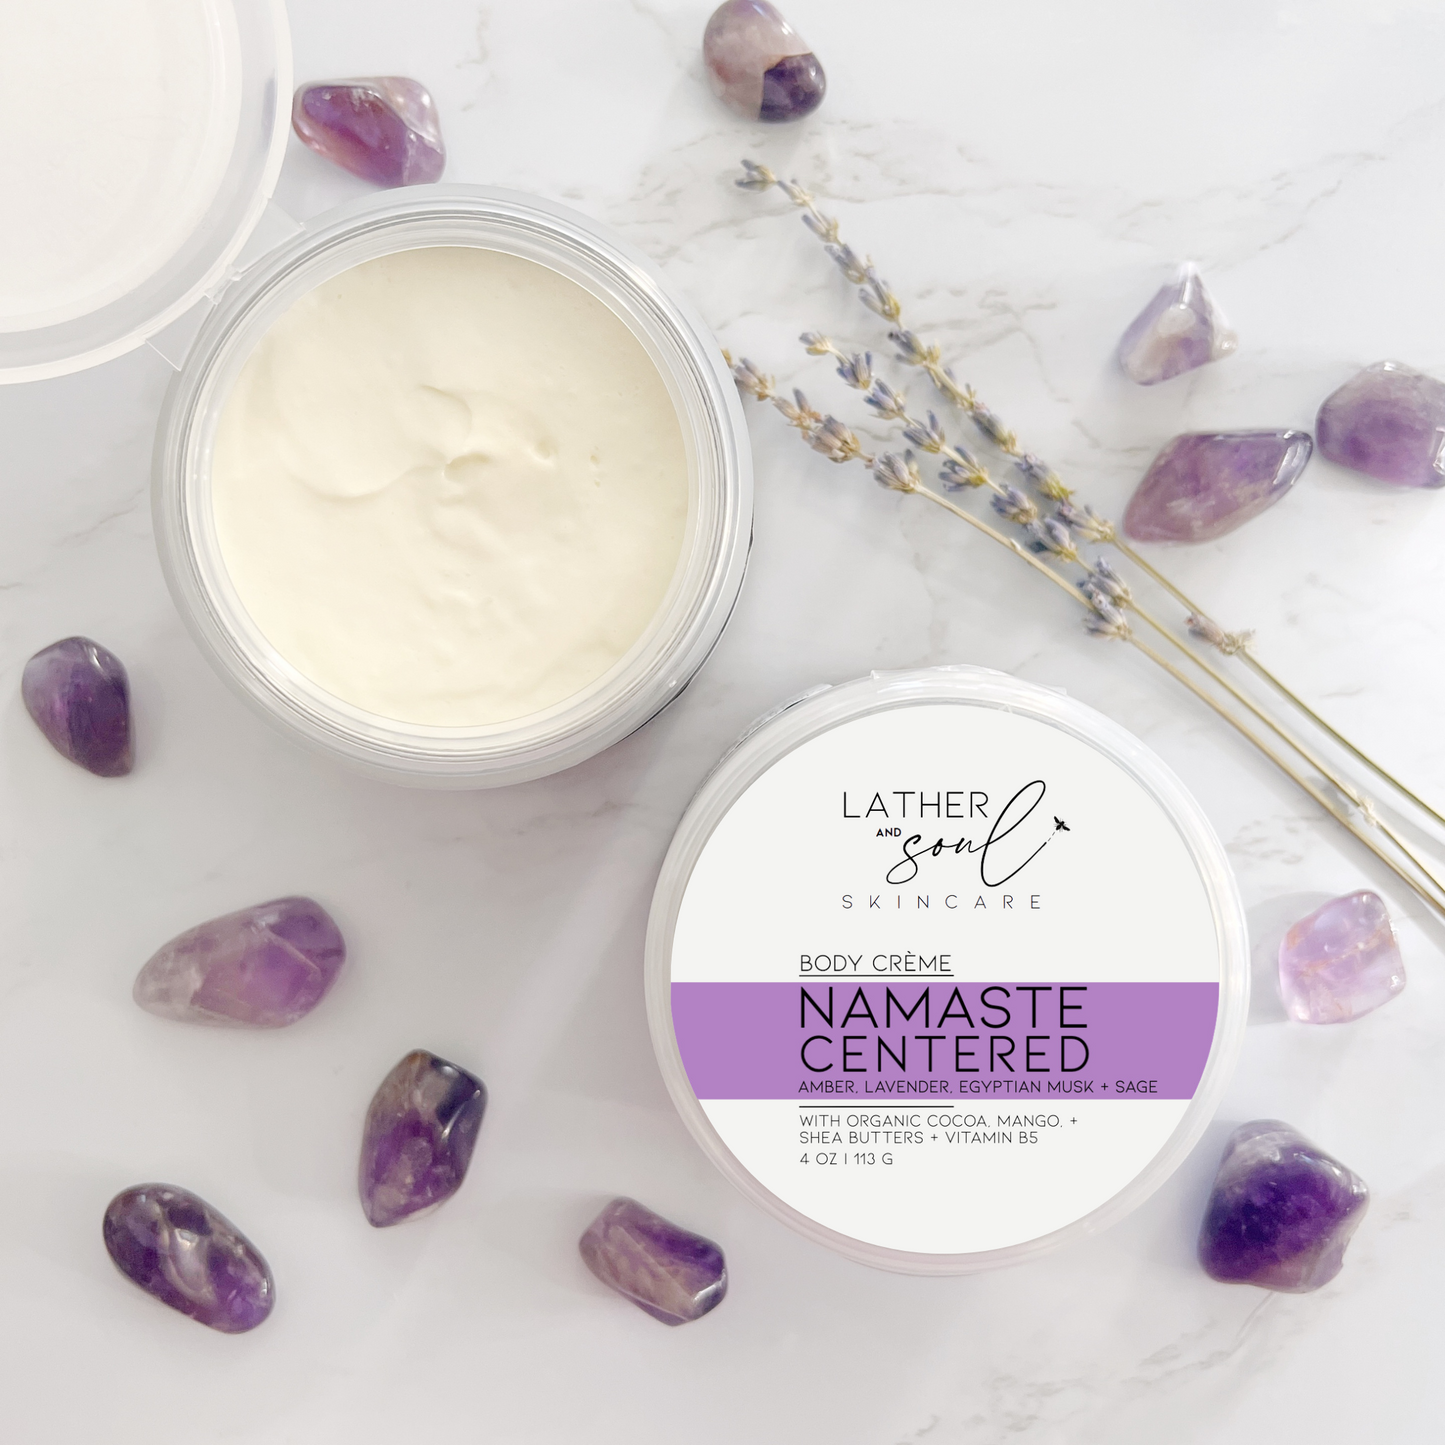 Luxurious body crème by Lather and Soul Skincare, on white table with amethysts, in Namaste Centered scent.